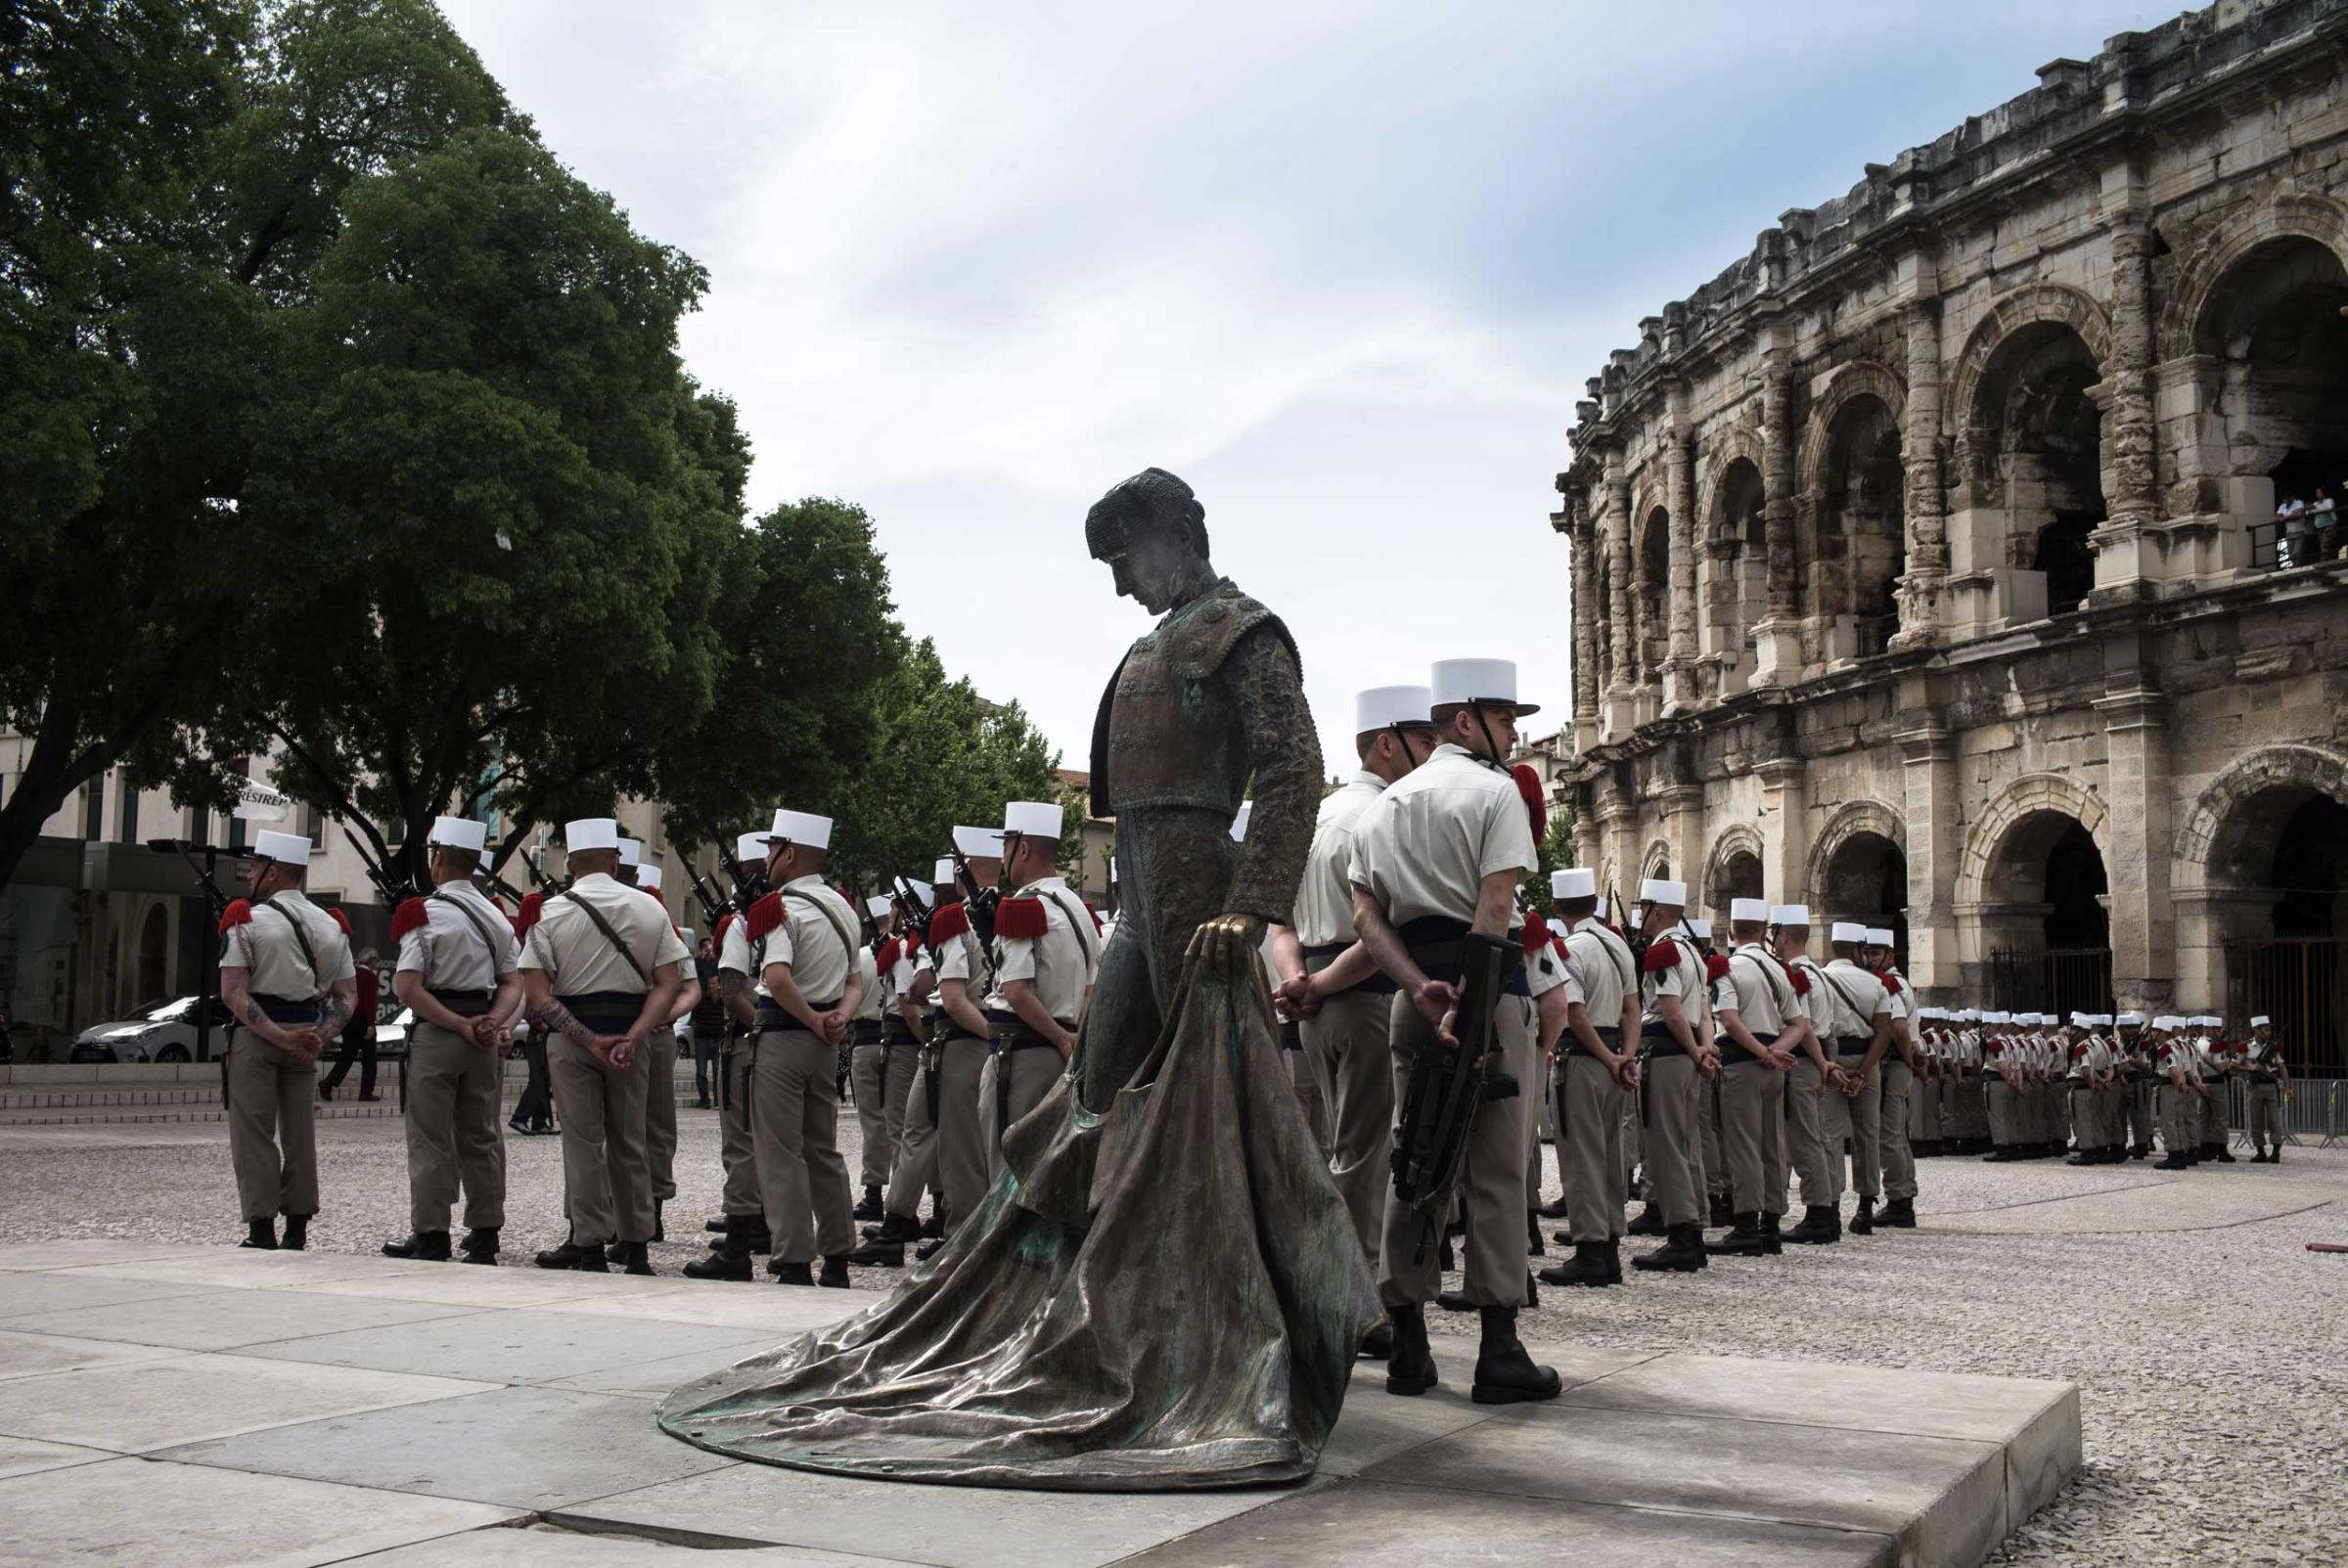 Members of the French Foreign Legion get ready for their annual parade on "Camerone Day" at Nimes' Roman Arenas in France. April 29, 2015.